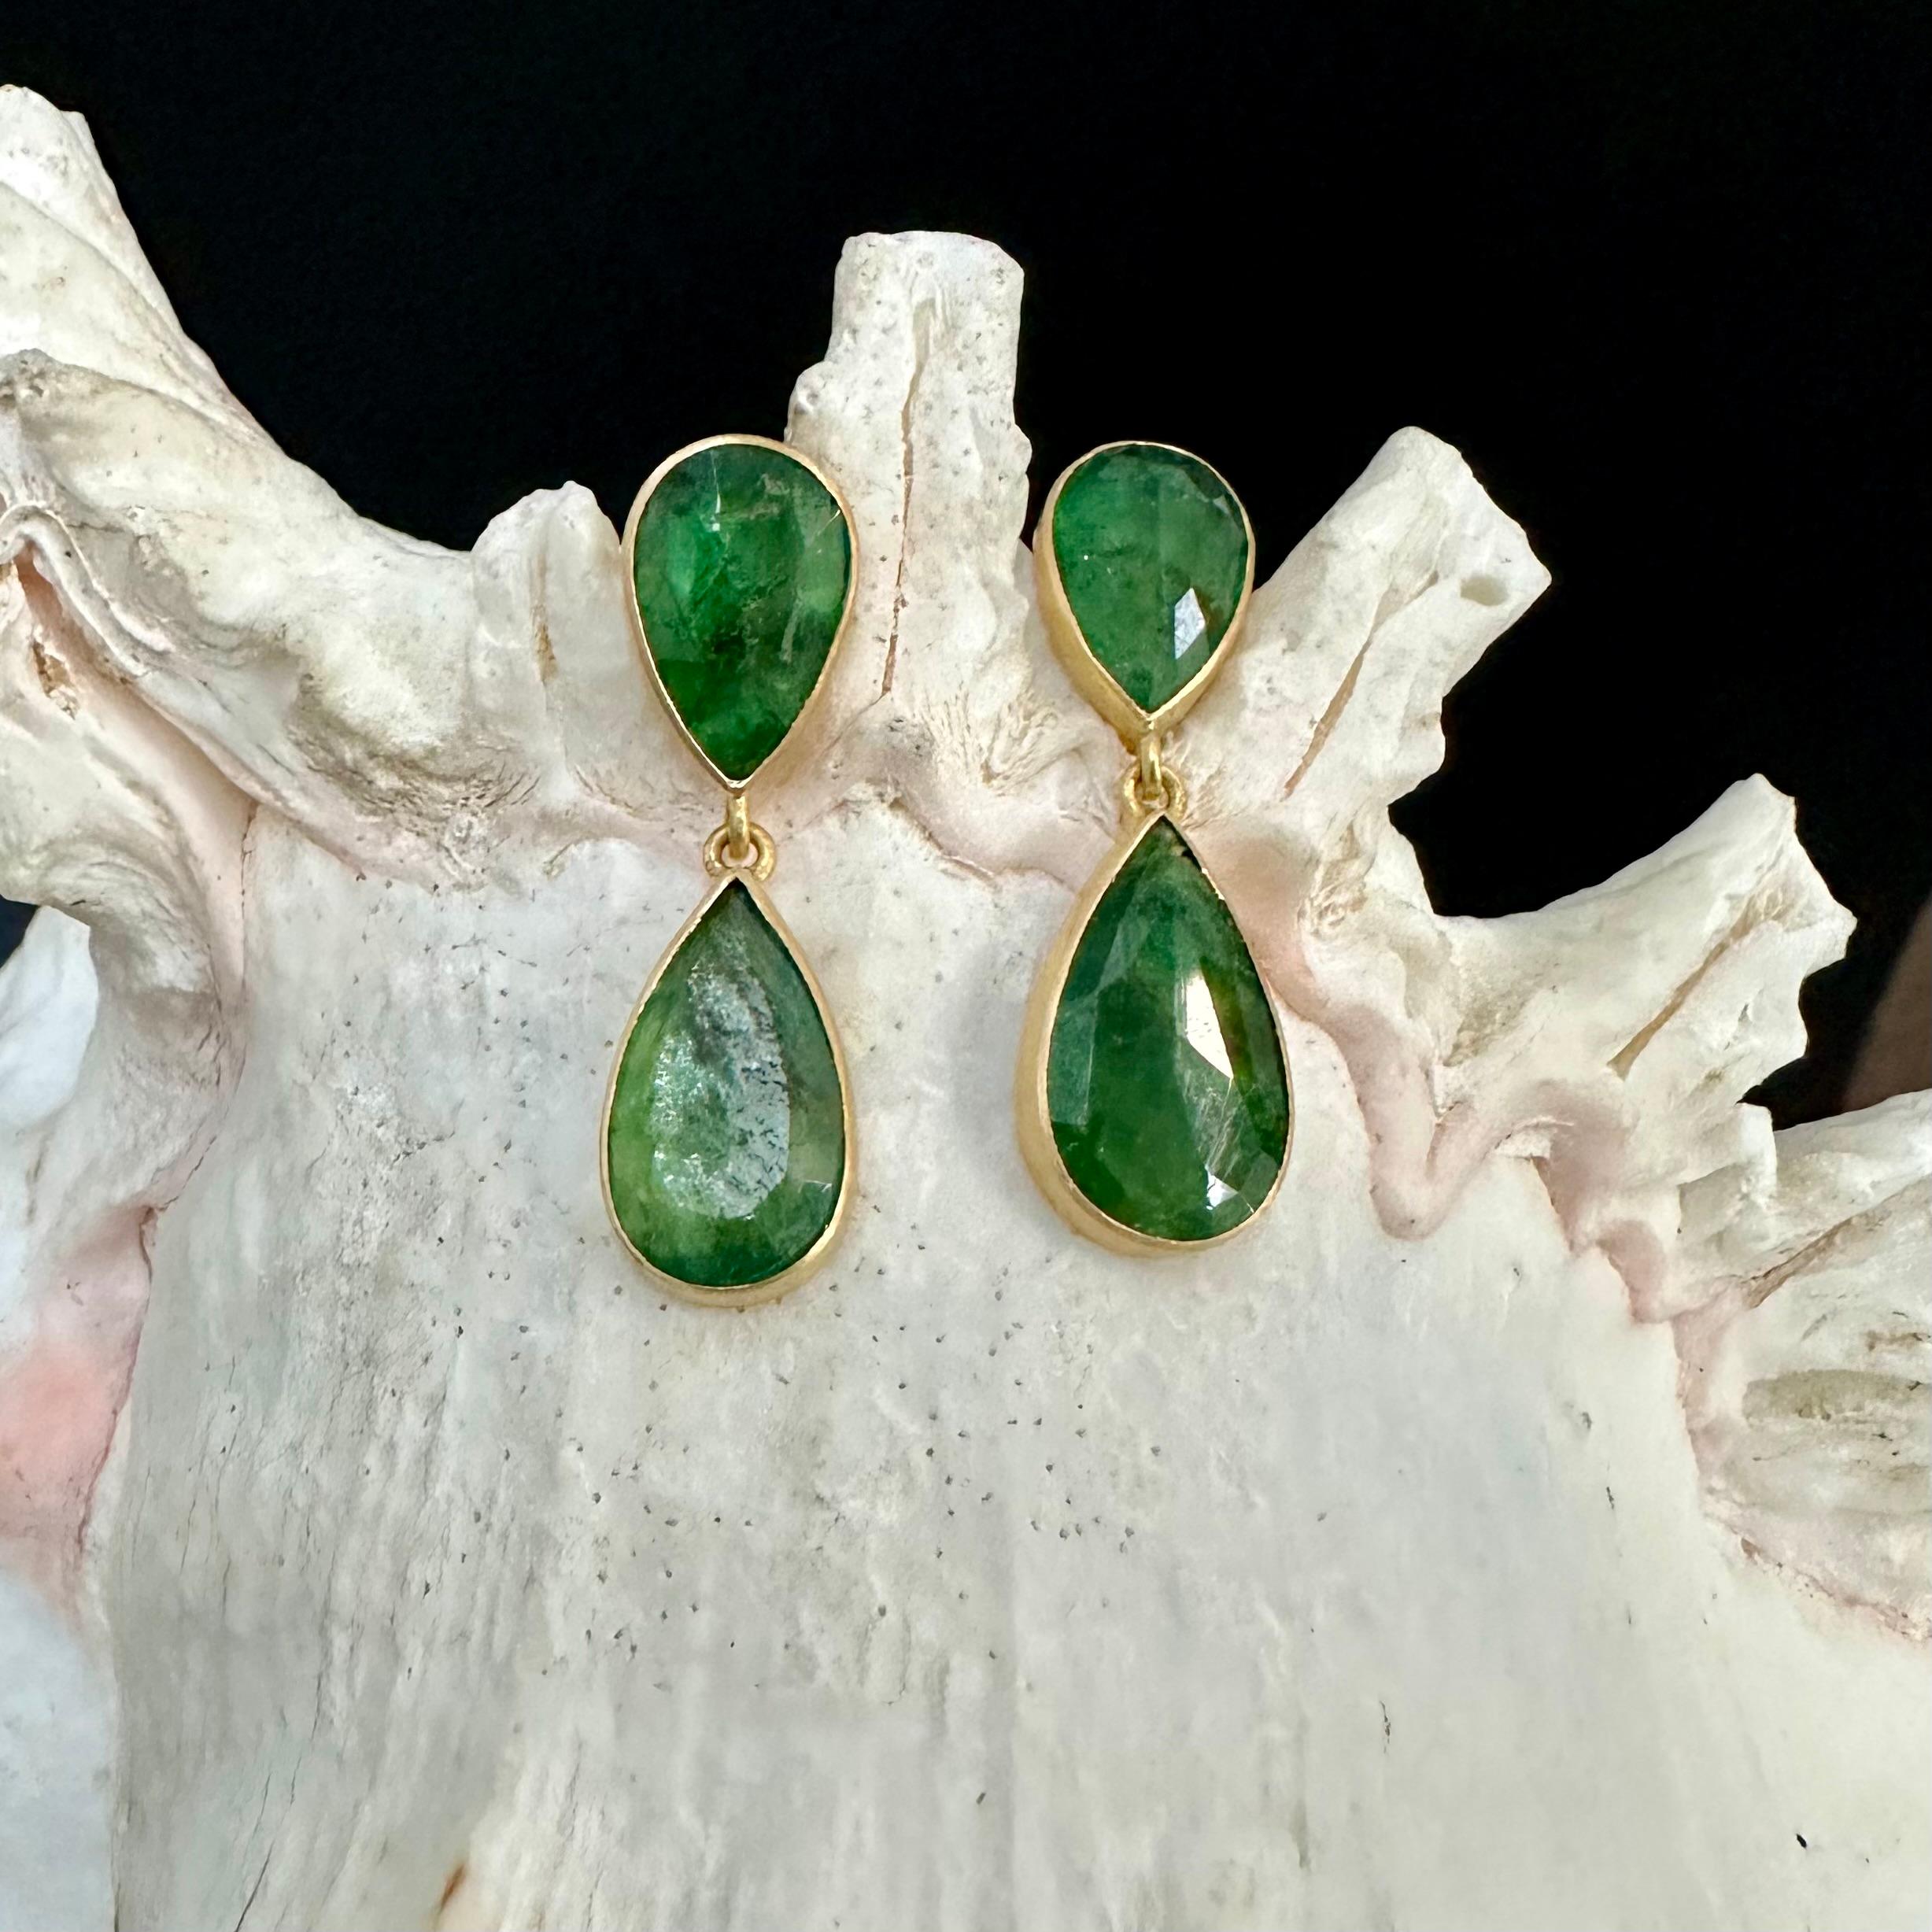 Ultimately simple large faceted pear shaped emeralds of 8 x 12 mm and 9 x 15 mm are arranged in classic geometric opposition in these impressive earrings set in matte-finish 18K gold.  Comfortable silicone ear nuts complete.  No need for extra